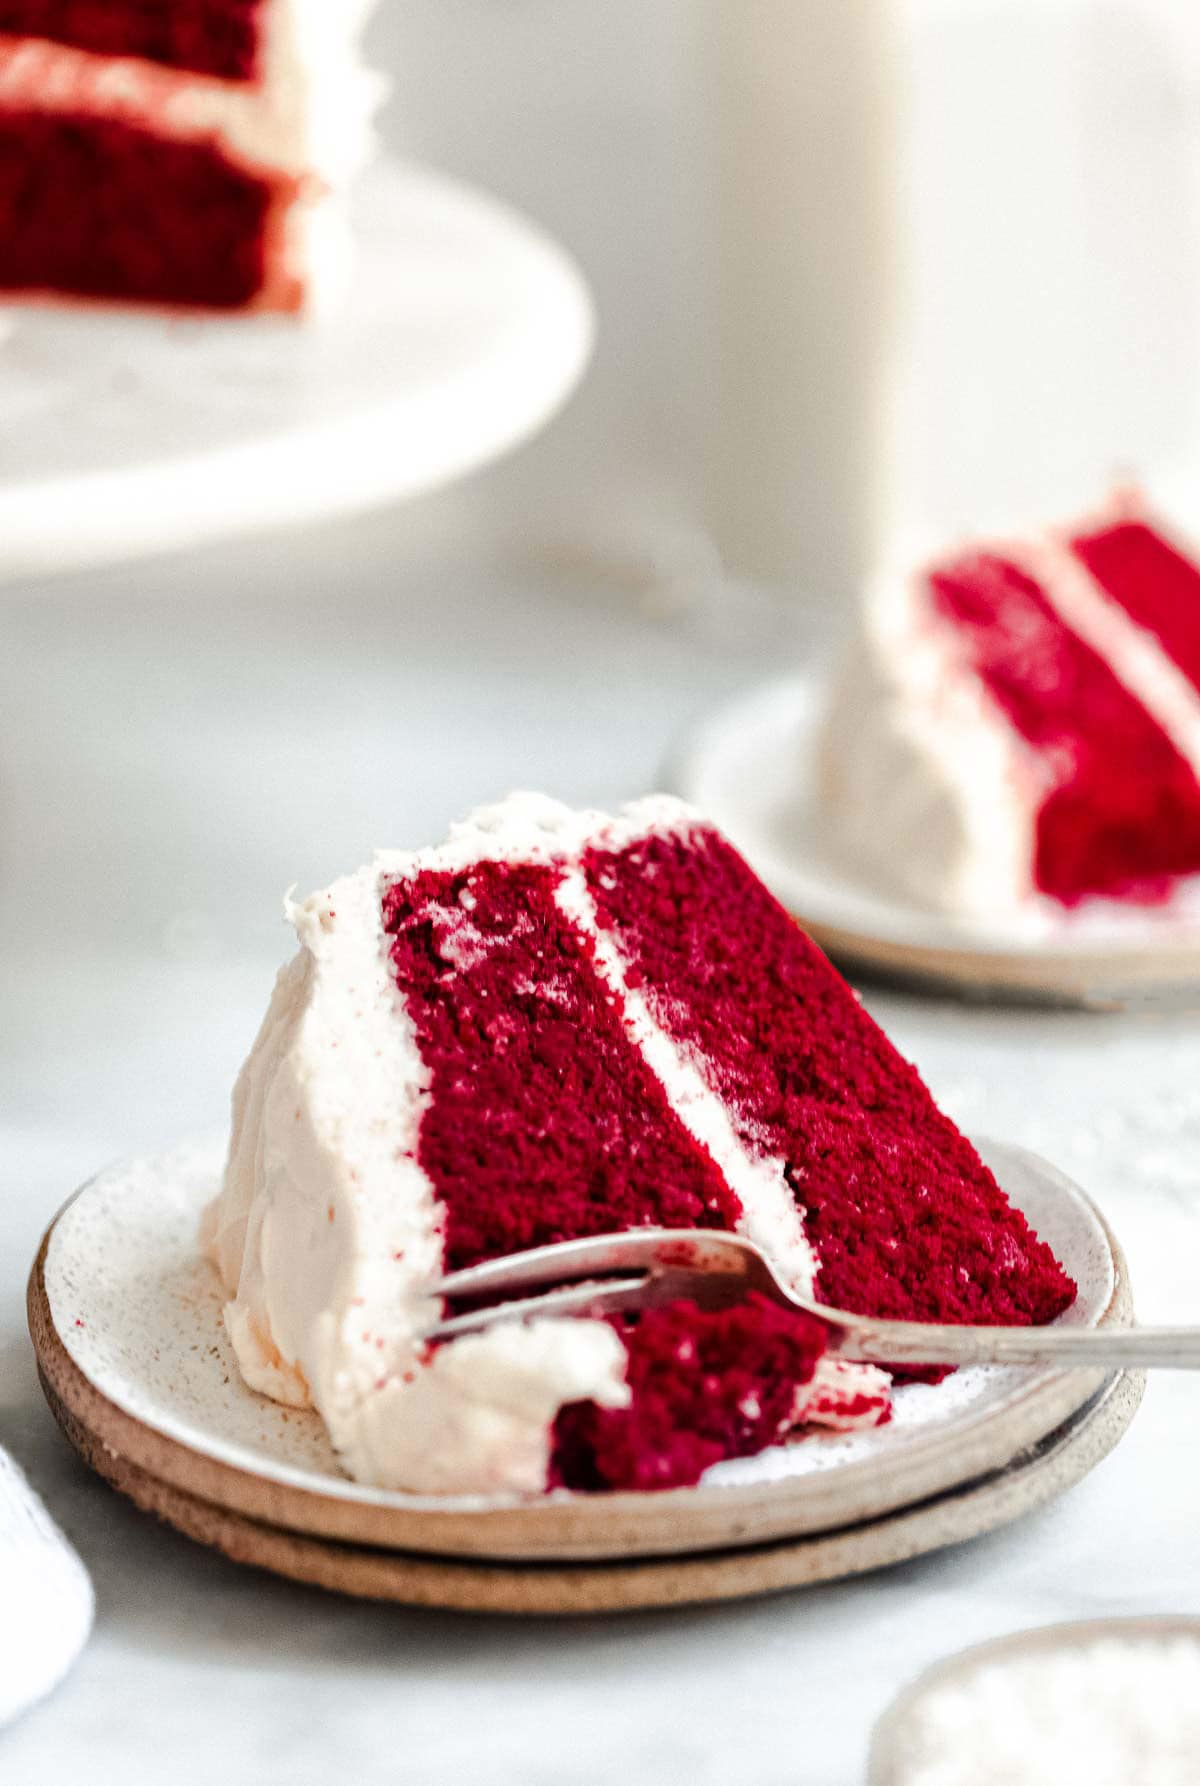 red velvet cake on a plate with a fork